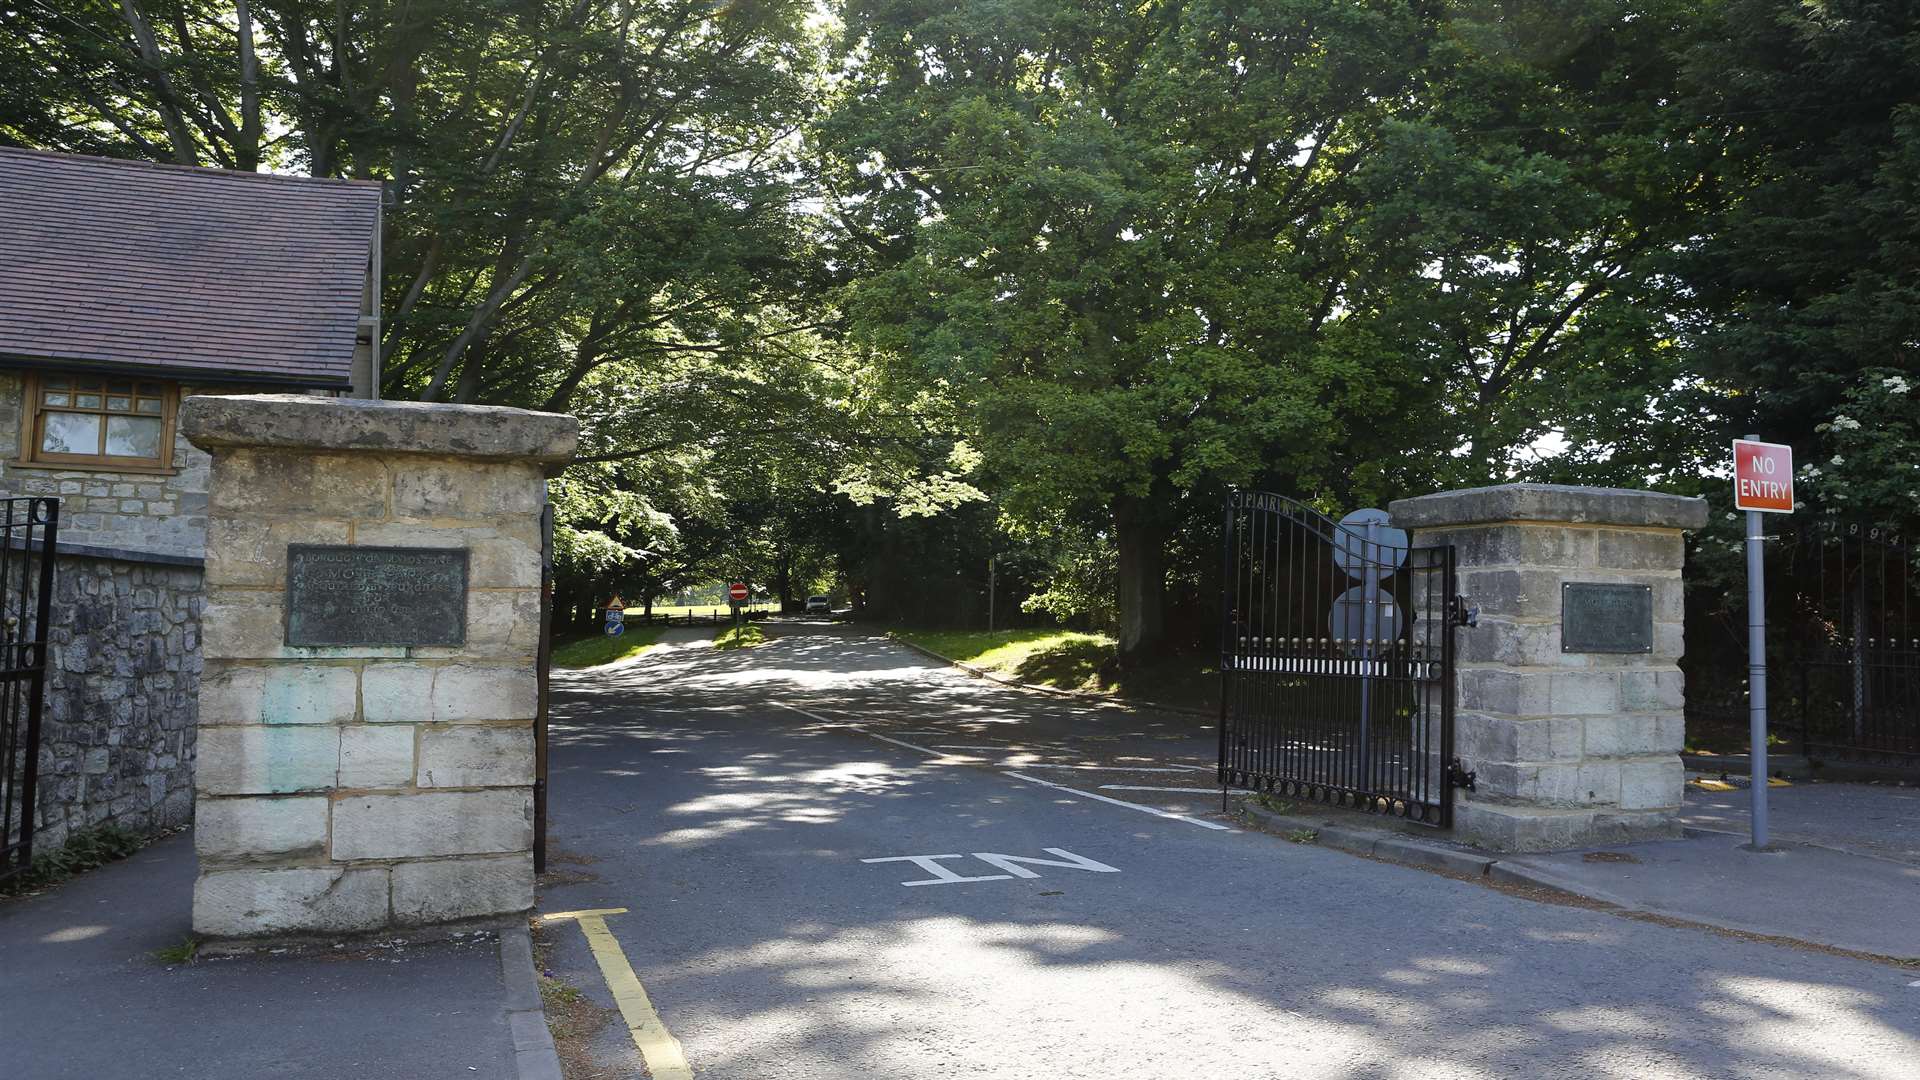 Entrance to Mote Park, Maidstone